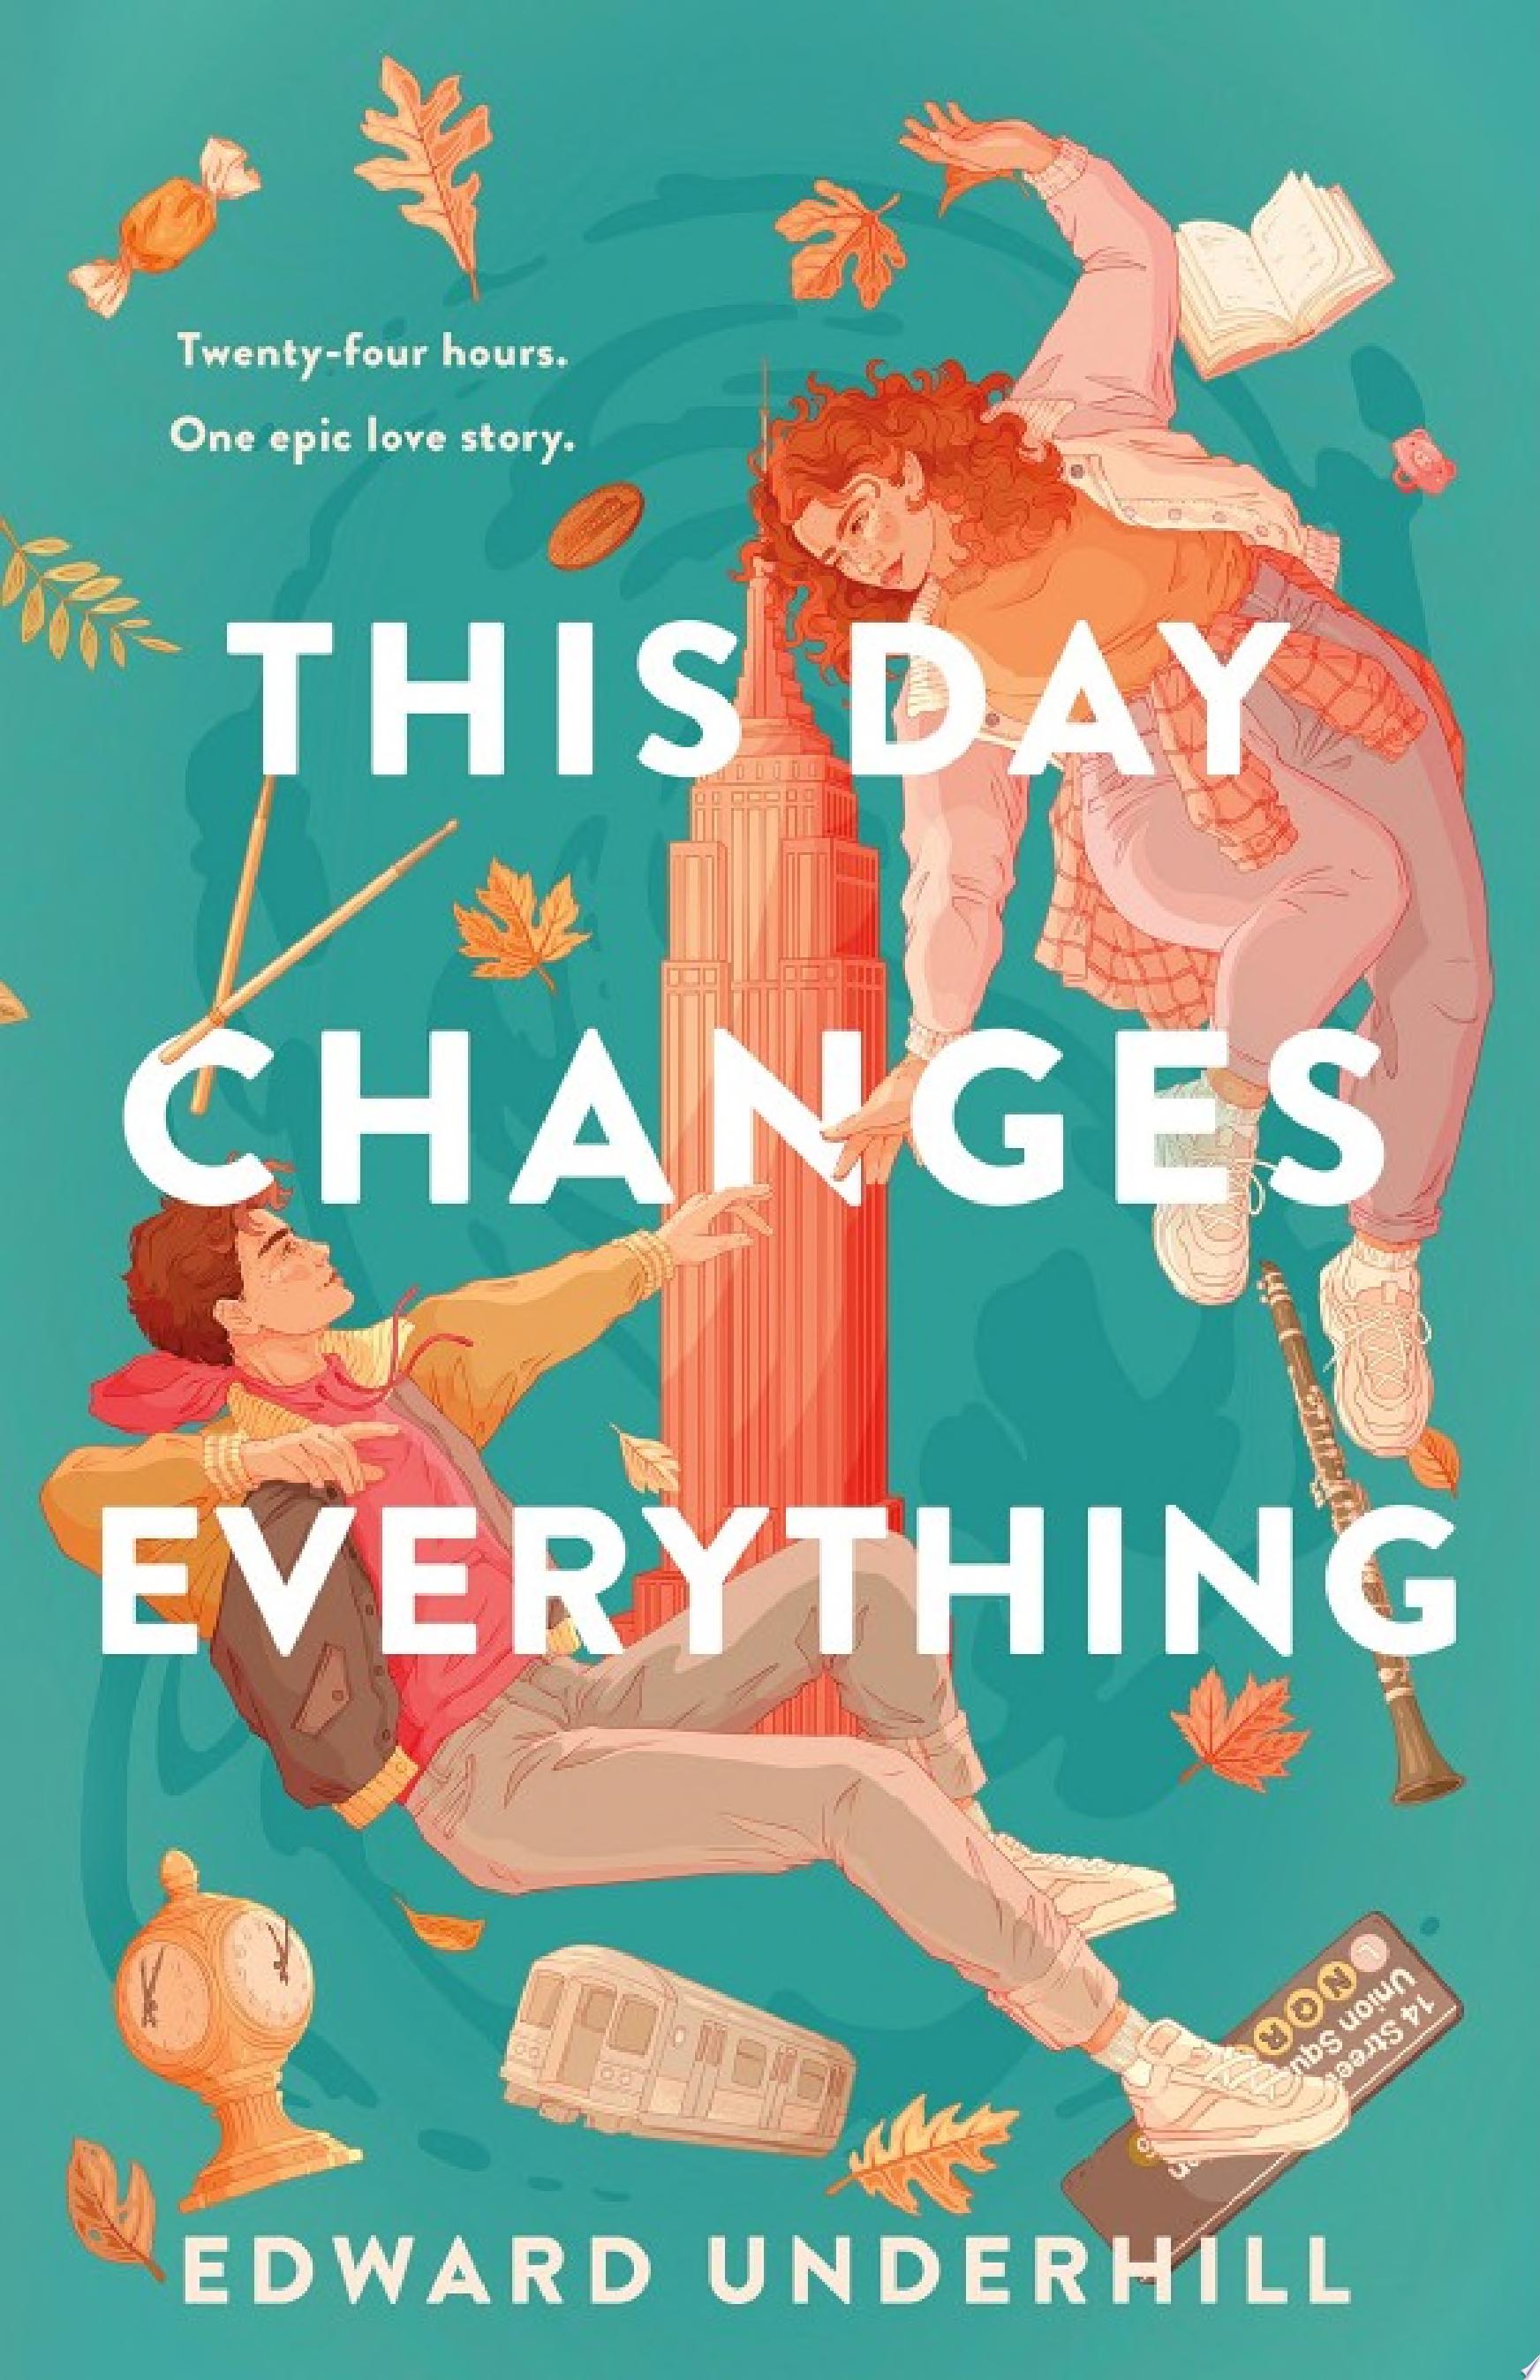 Image for "This Day Changes Everything"